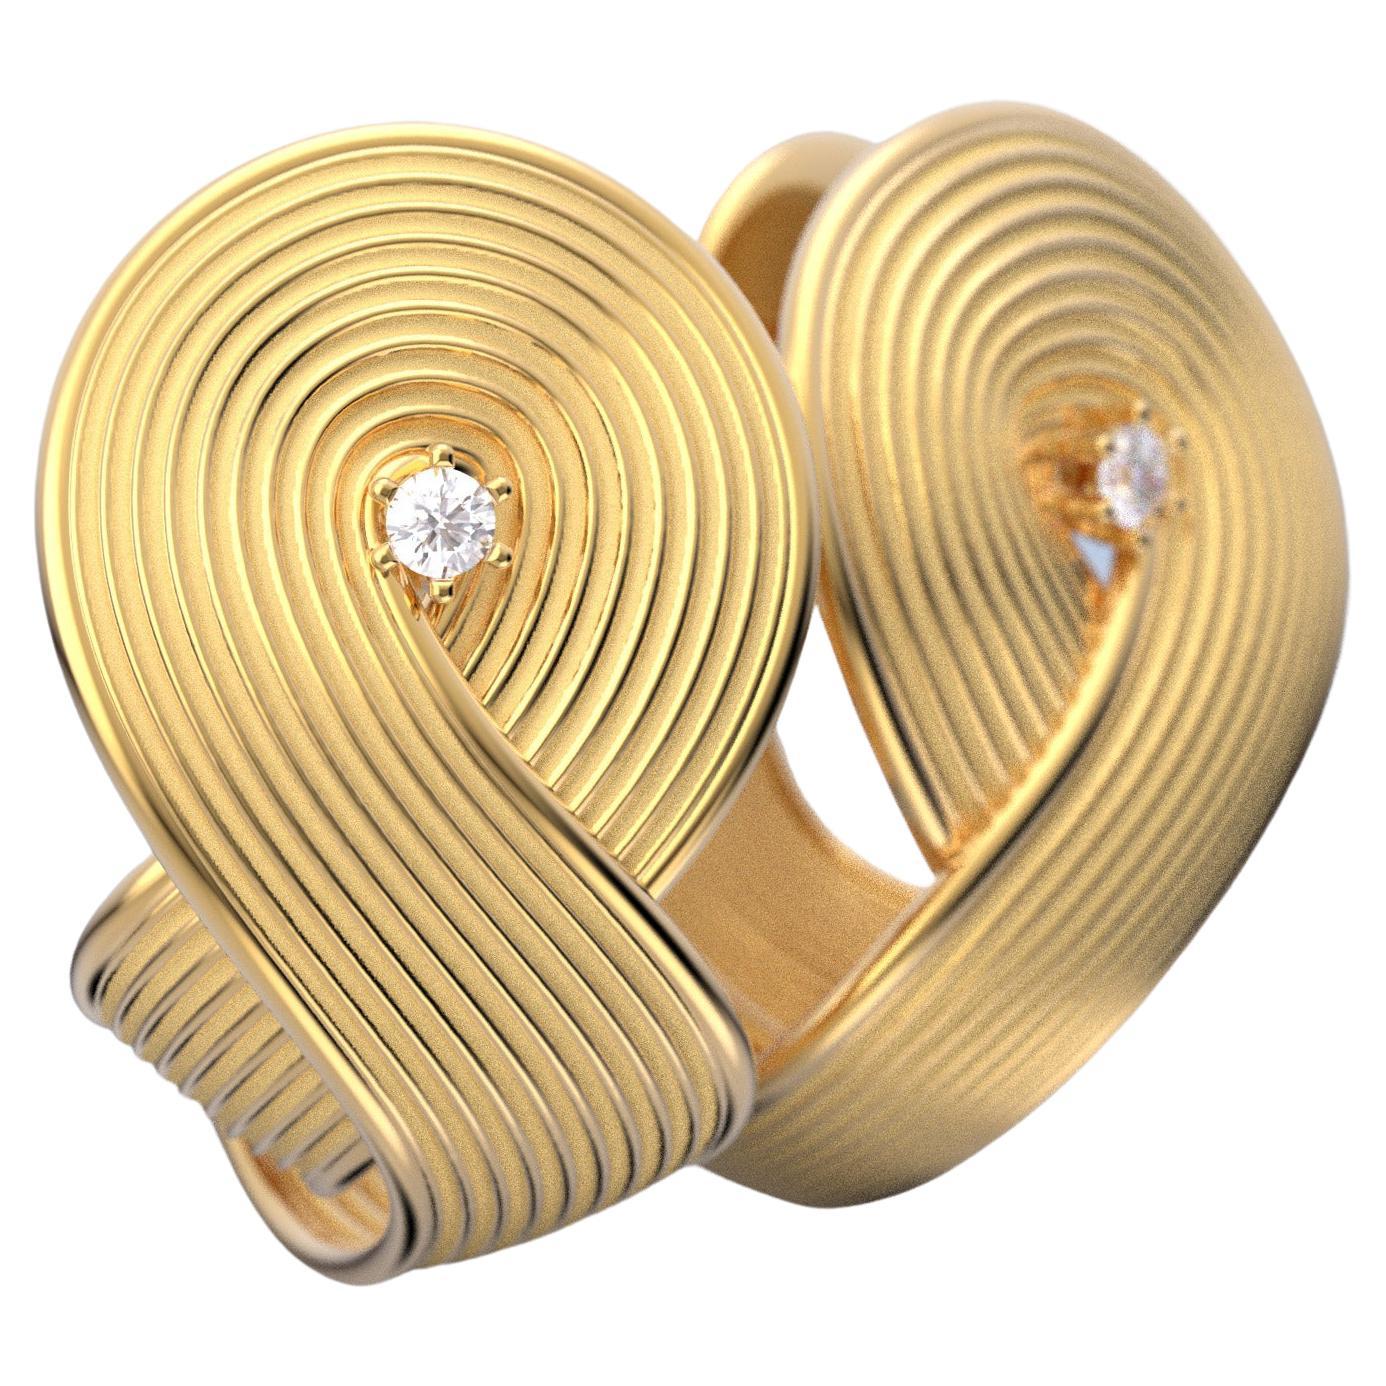 Stunning Diamond Earrings in 14k Gold , made in Italy. Only made to Order. For Sale